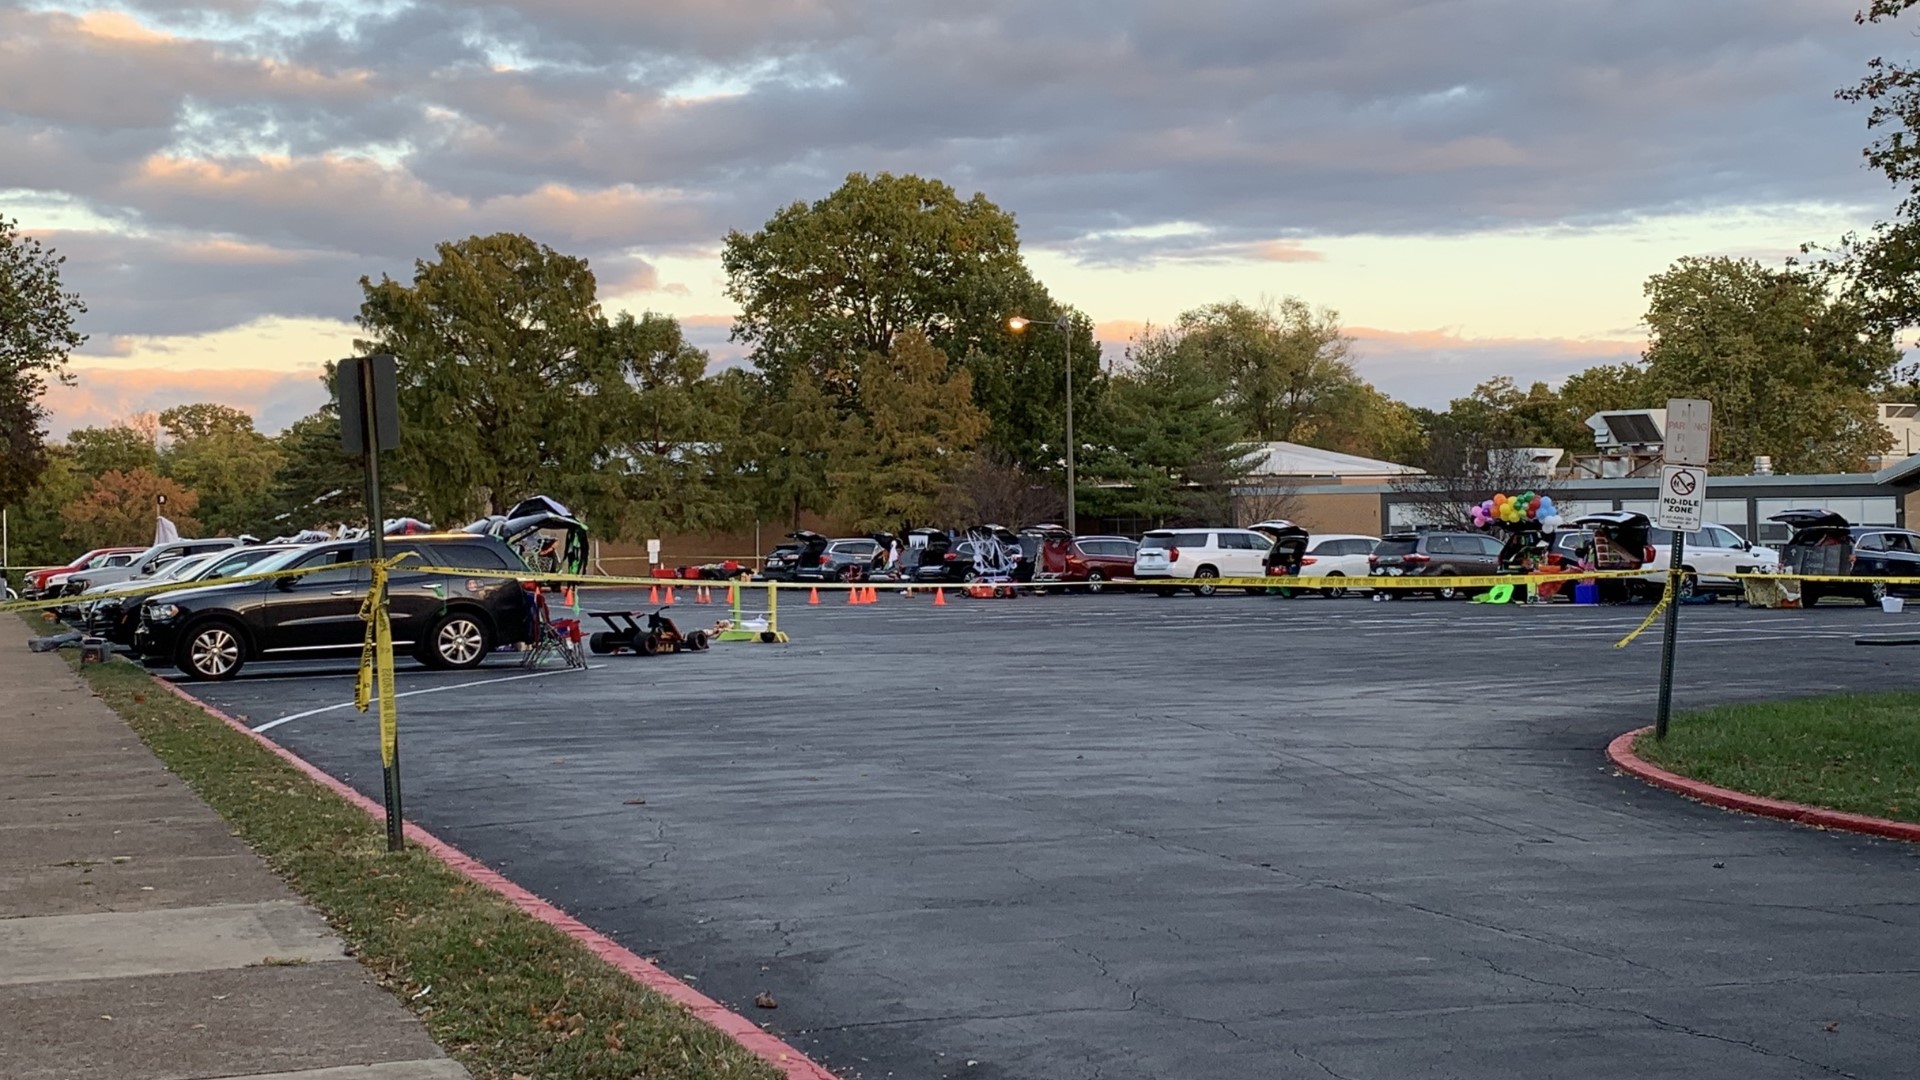 Sources say a St. Louis County police officer was the man who fired shots at a Kirkwood school event. No one was hurt and the man was arrested.